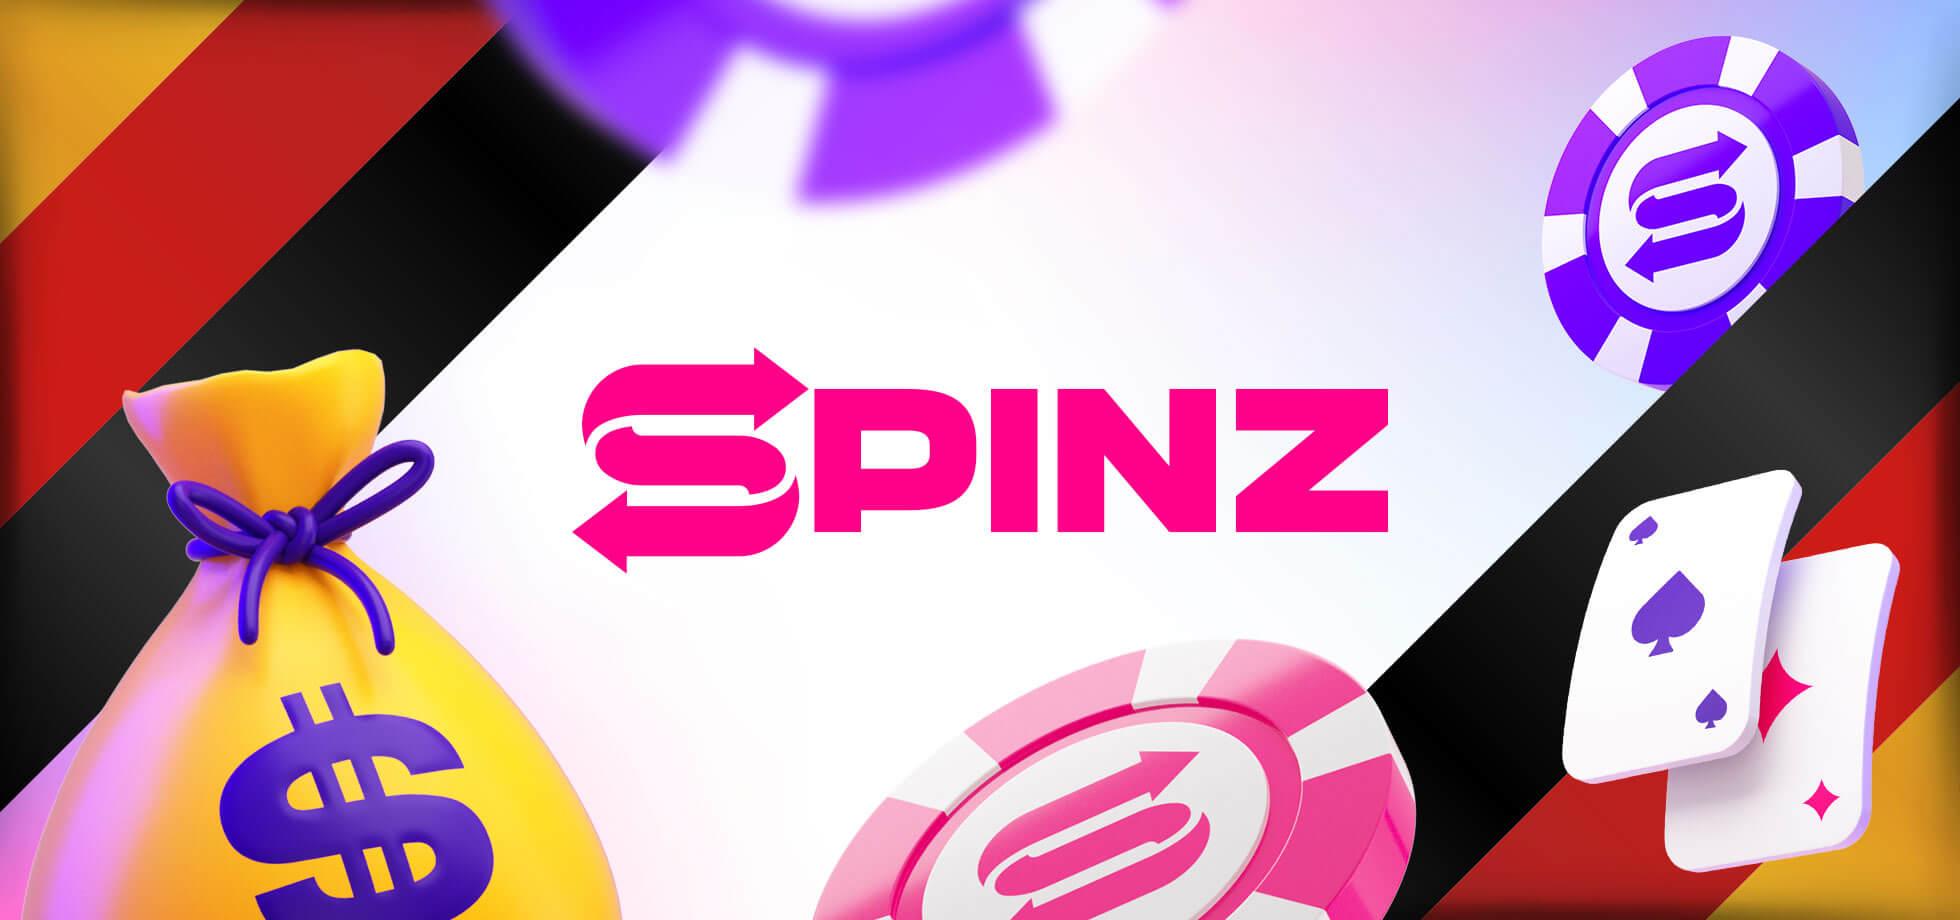 Welcome Spinz to Germany!